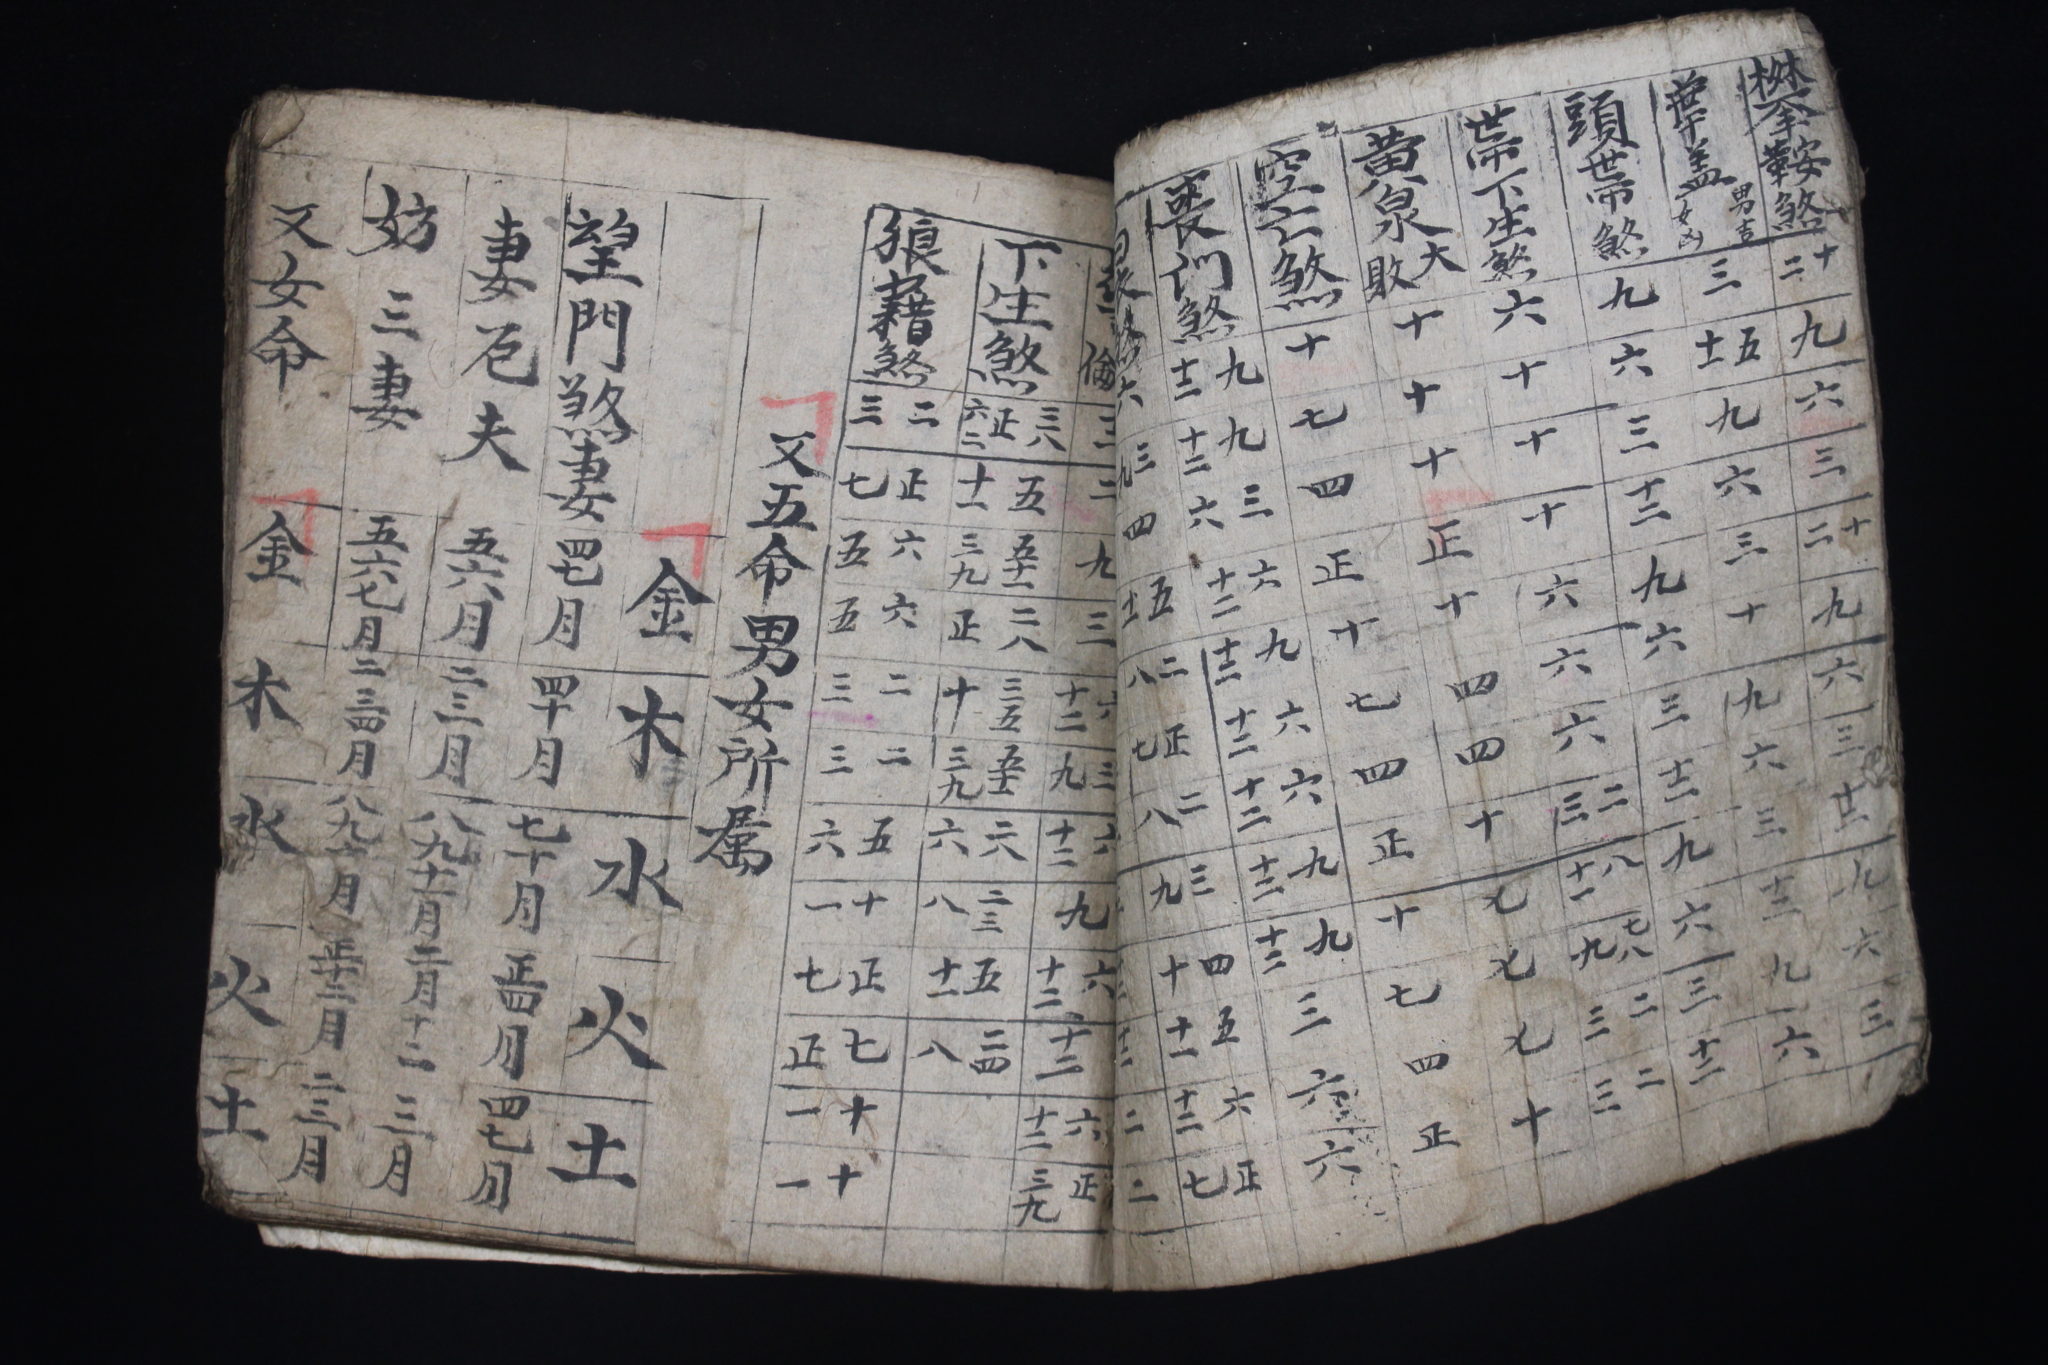 Inside Detail of Shaman’s Personal Instruction Book, Cao Bang province, Vietnam, Early 20th c, Ink on handmade mulberry paper (tapa), Written in Nom (Chinese characters adapted to Vietnamese), books are an integral part of a shaman’s repertoire. They range from explanations of various rituals and use of objects, to astrology, history, songs, laws, etiquette, children’s tales, hunting practices, formulas, spells and Feng Shui. Shaman make their own books to help store their knowledge therefore no two are alike and a high level shaman will have a large library. 9 ½” x 8 ½” x ¾”, $850.